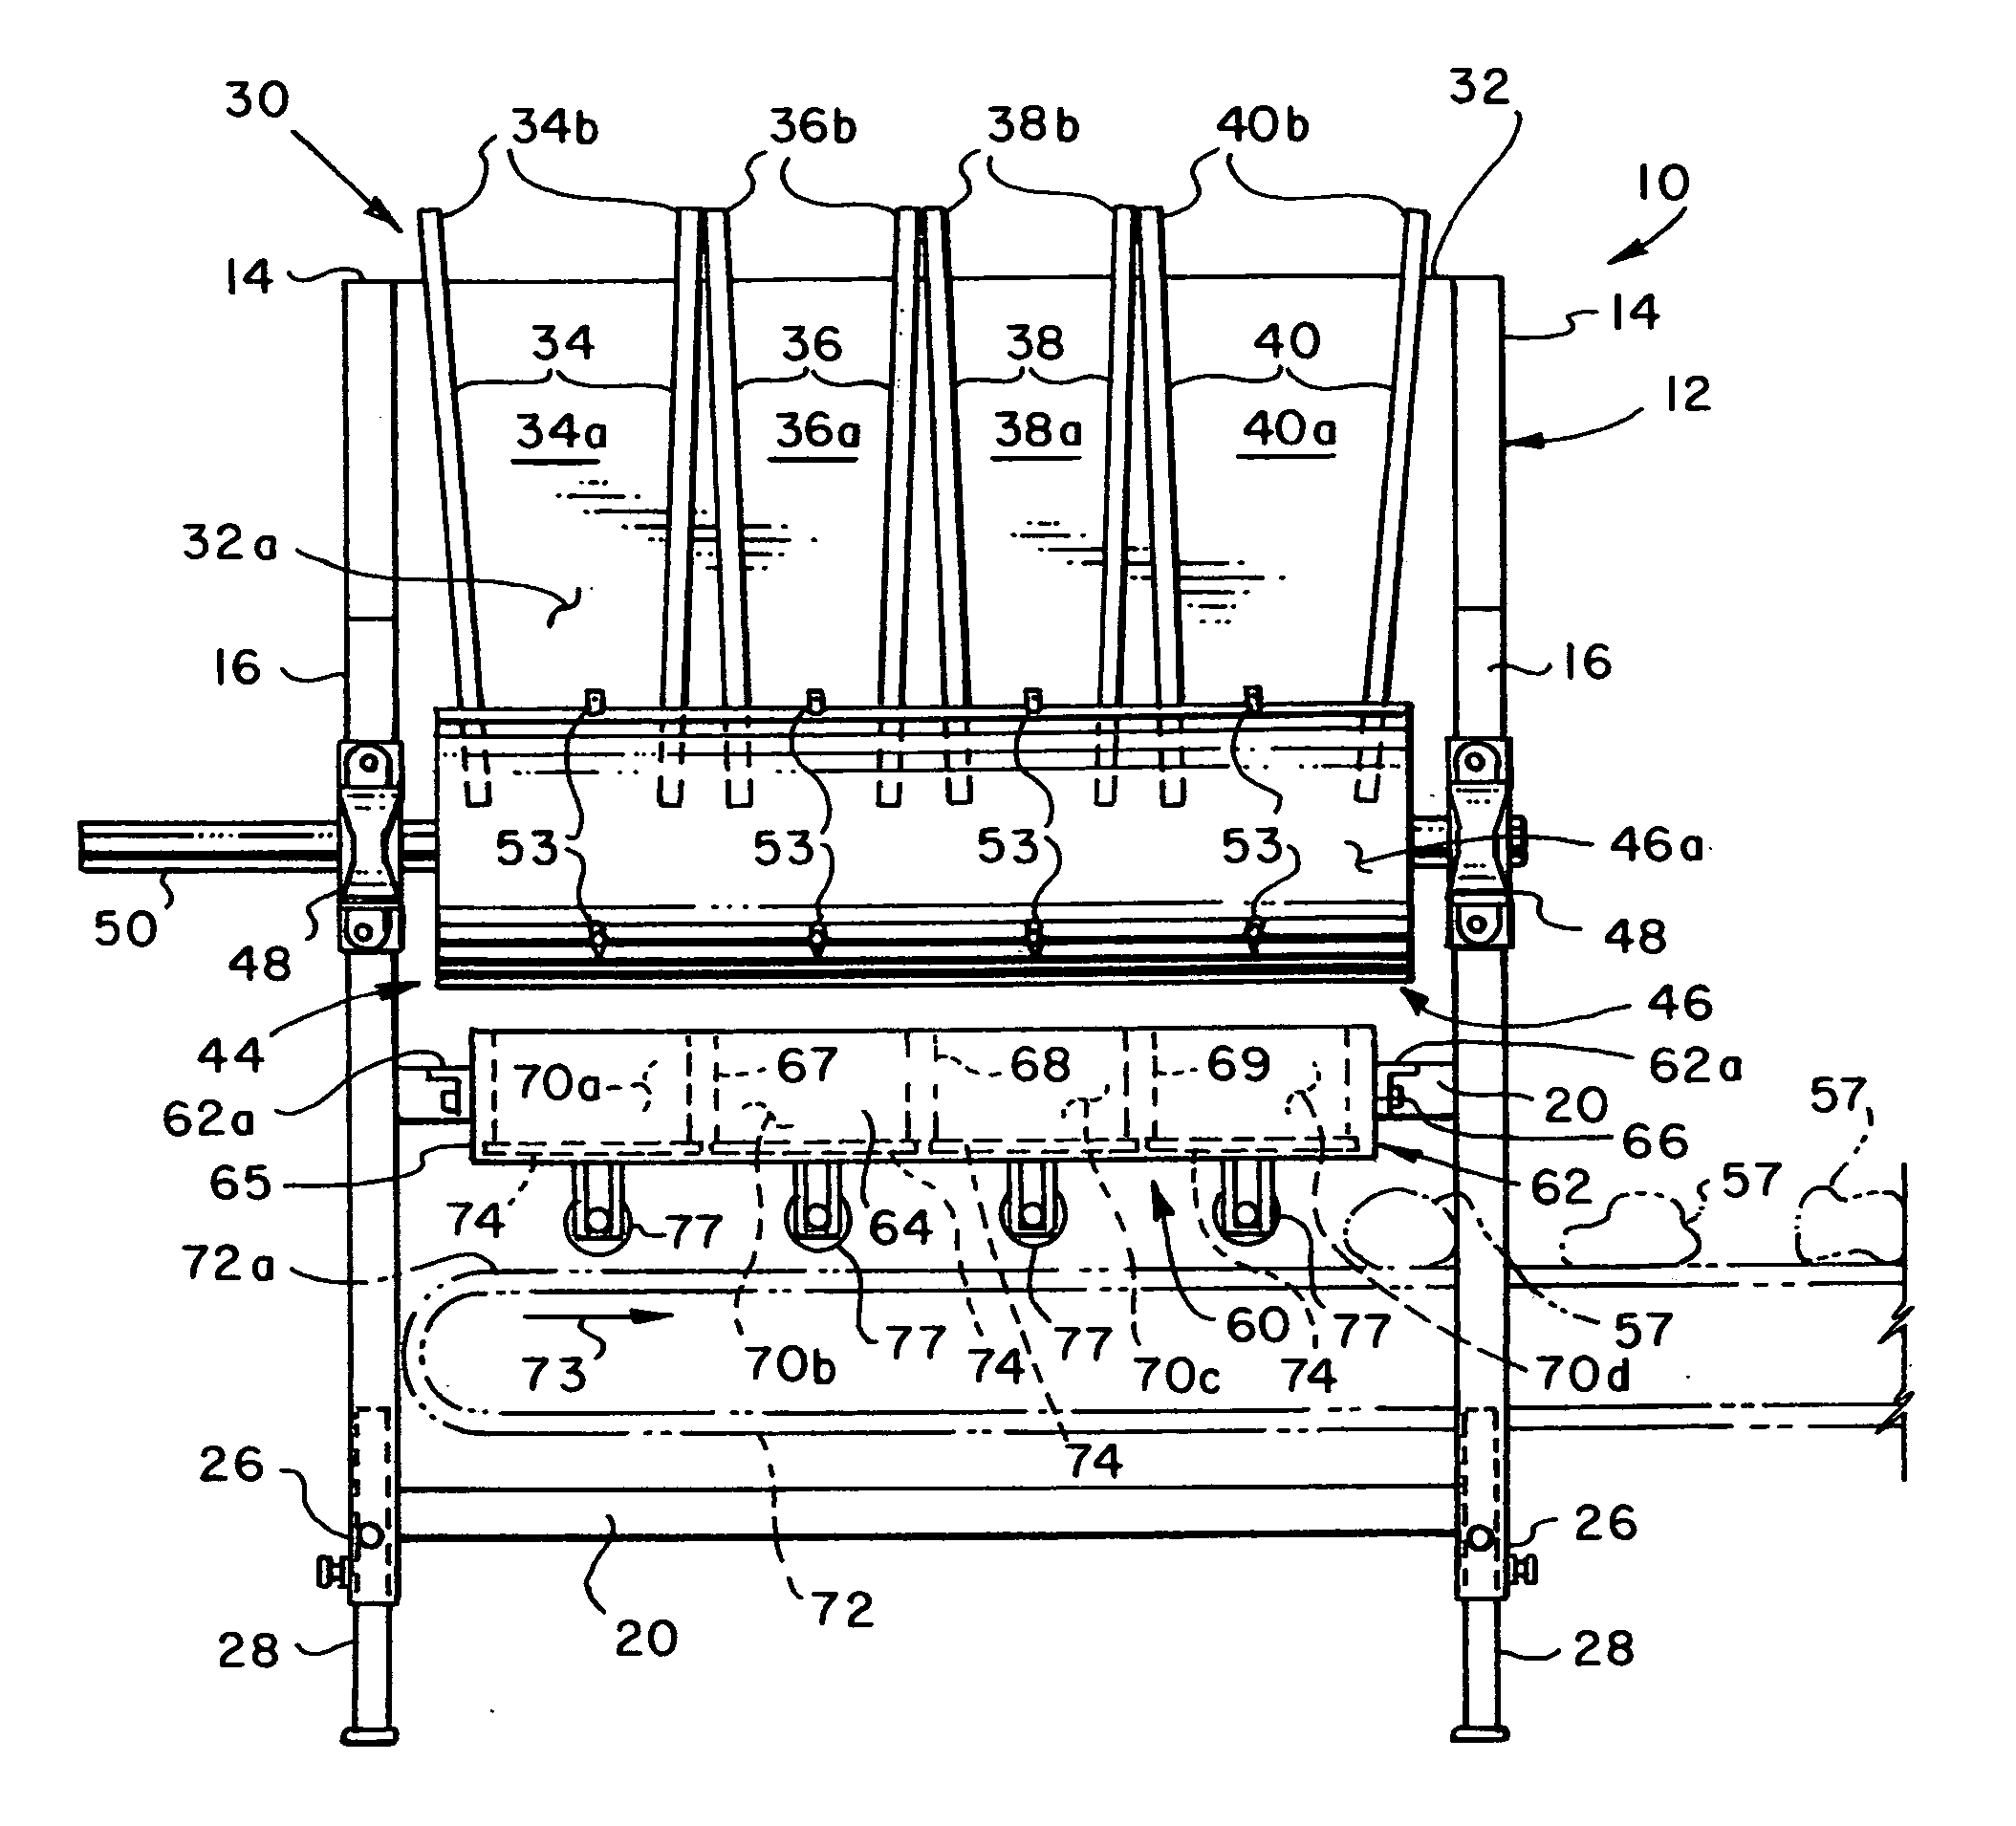 Apparatus for separating and conveying articles